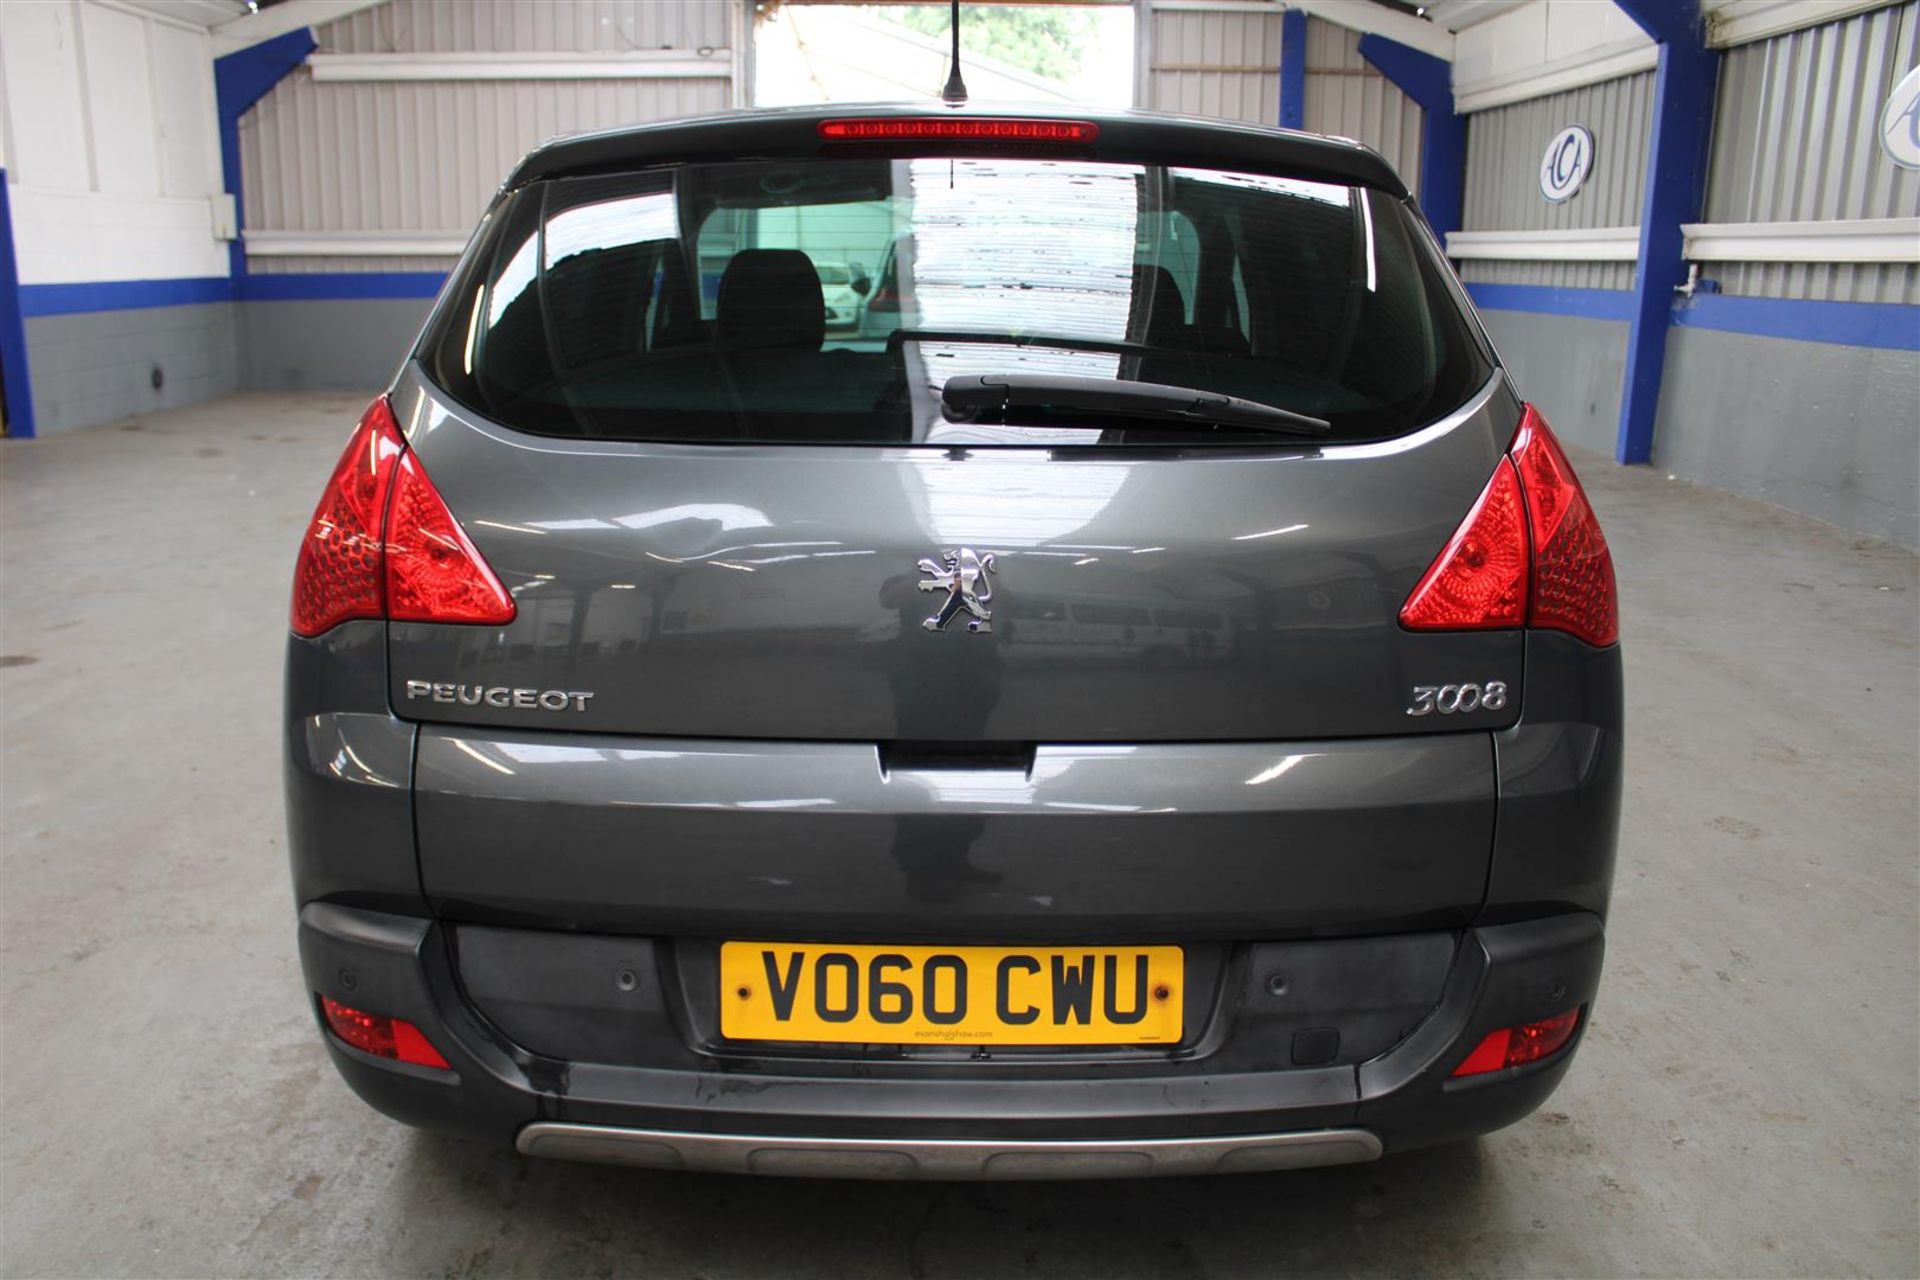 60 10 Peugeot 3008 Exc HDI - Image 5 of 31